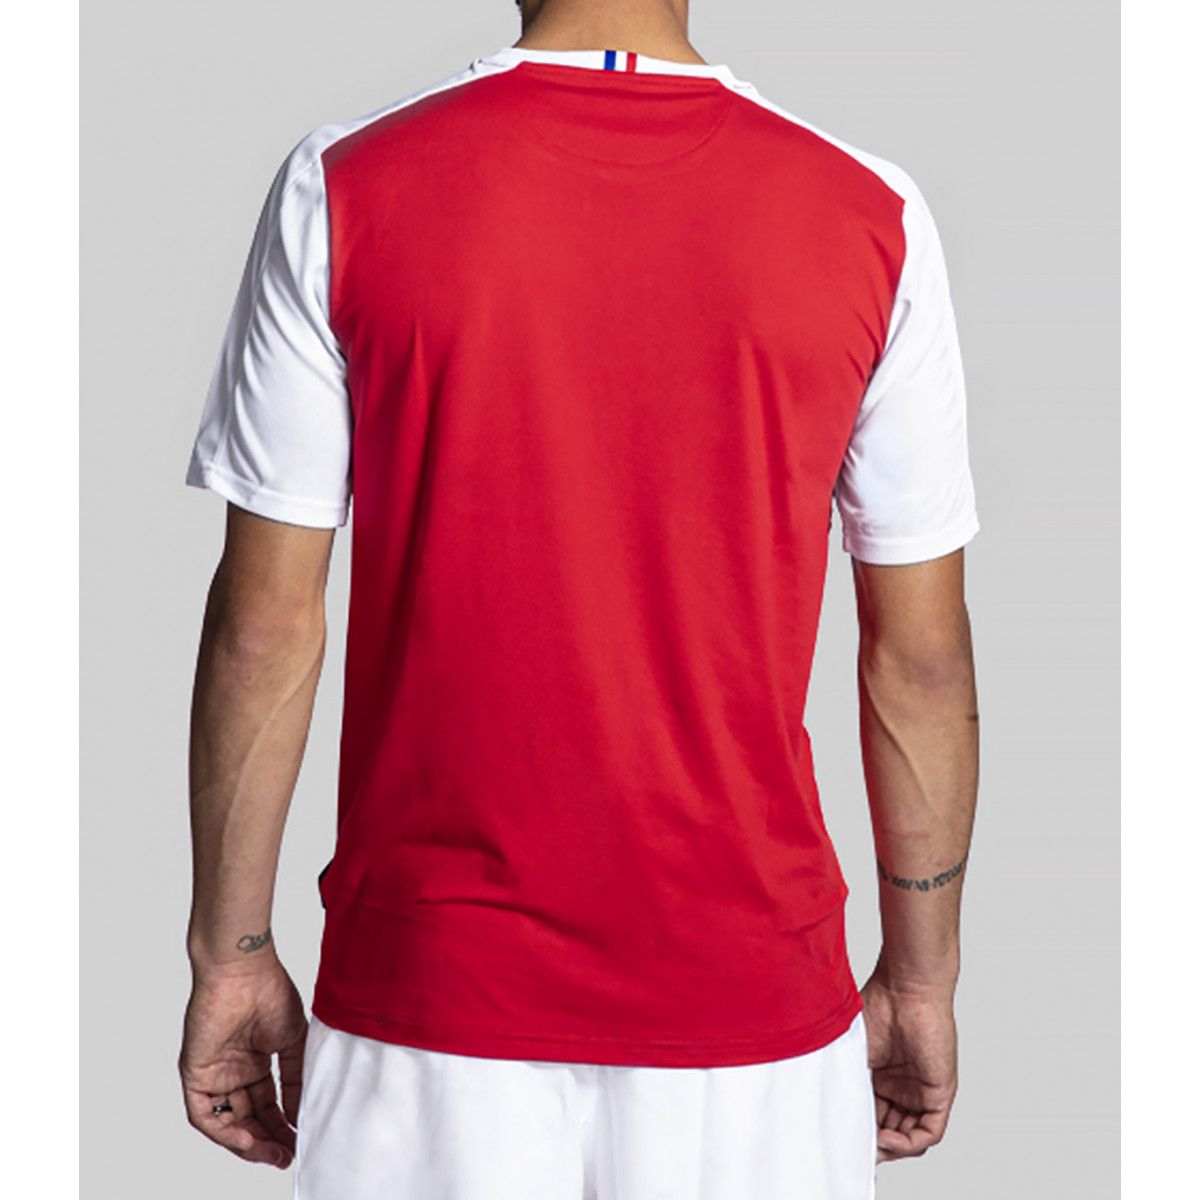 UMBRO Stade Reims Maillot Homme